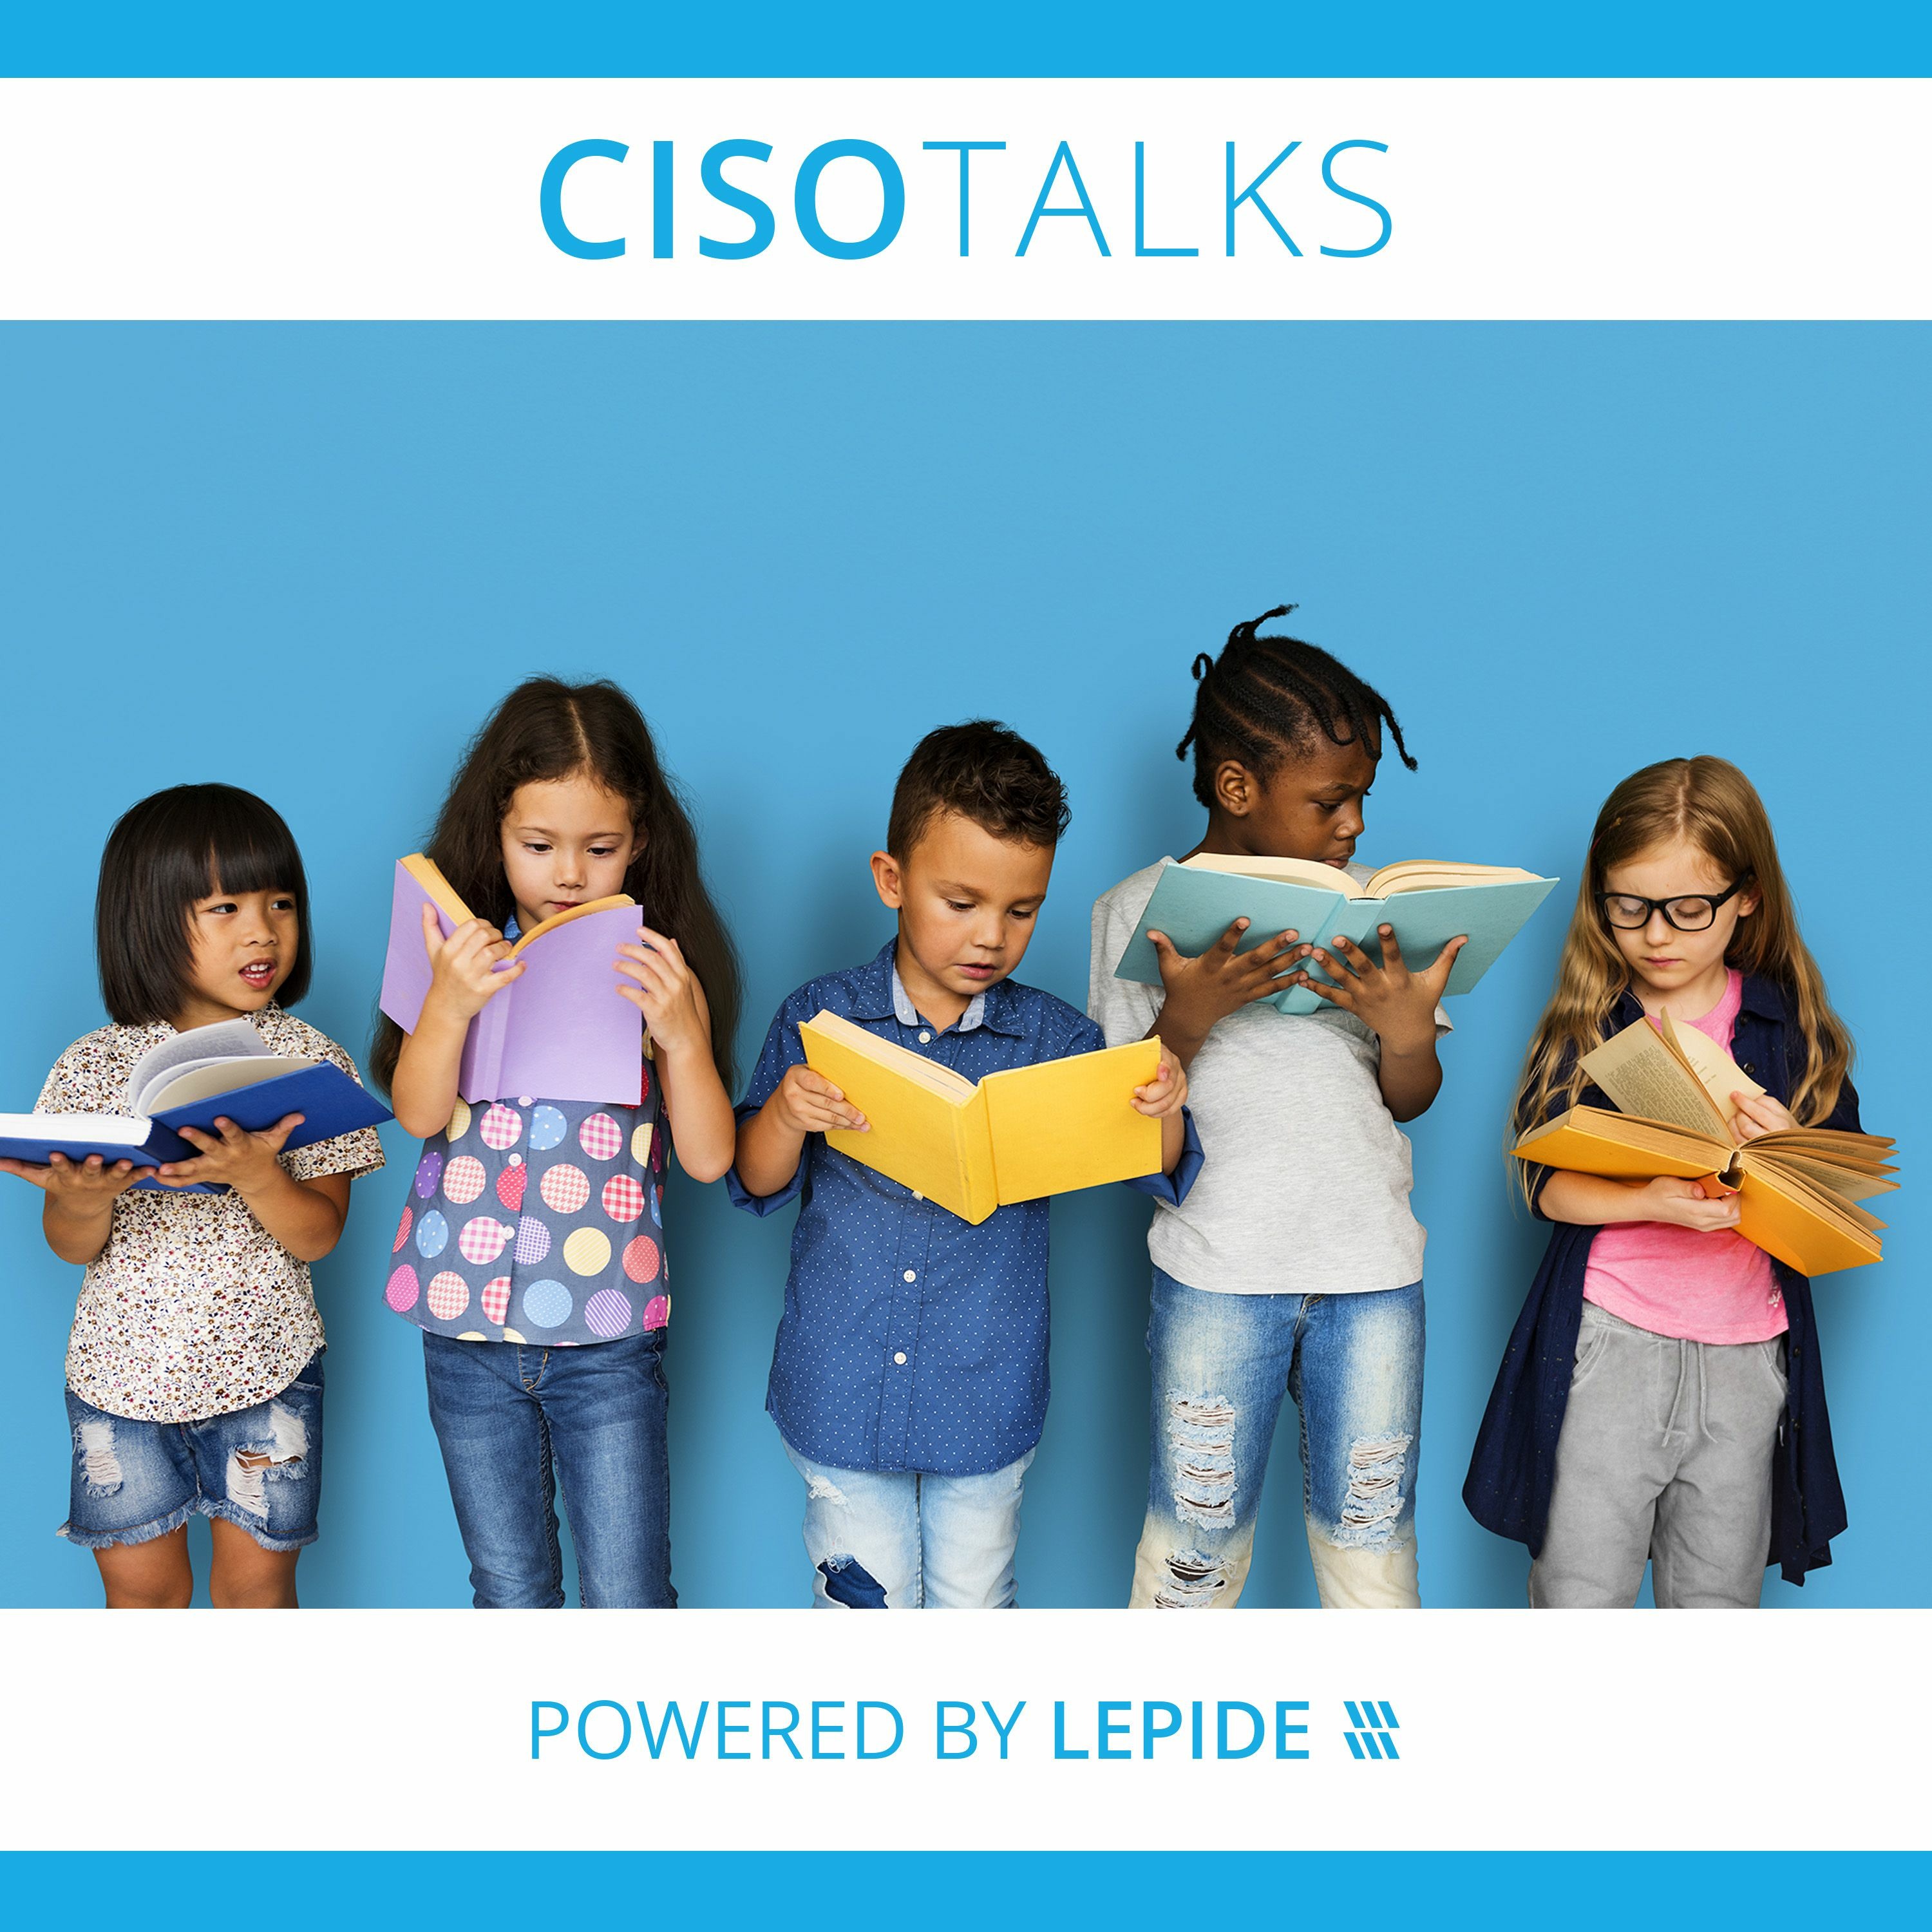 Would Teaching Kids Cybersecurity Make us More Secure in the Future? | CISO Talks